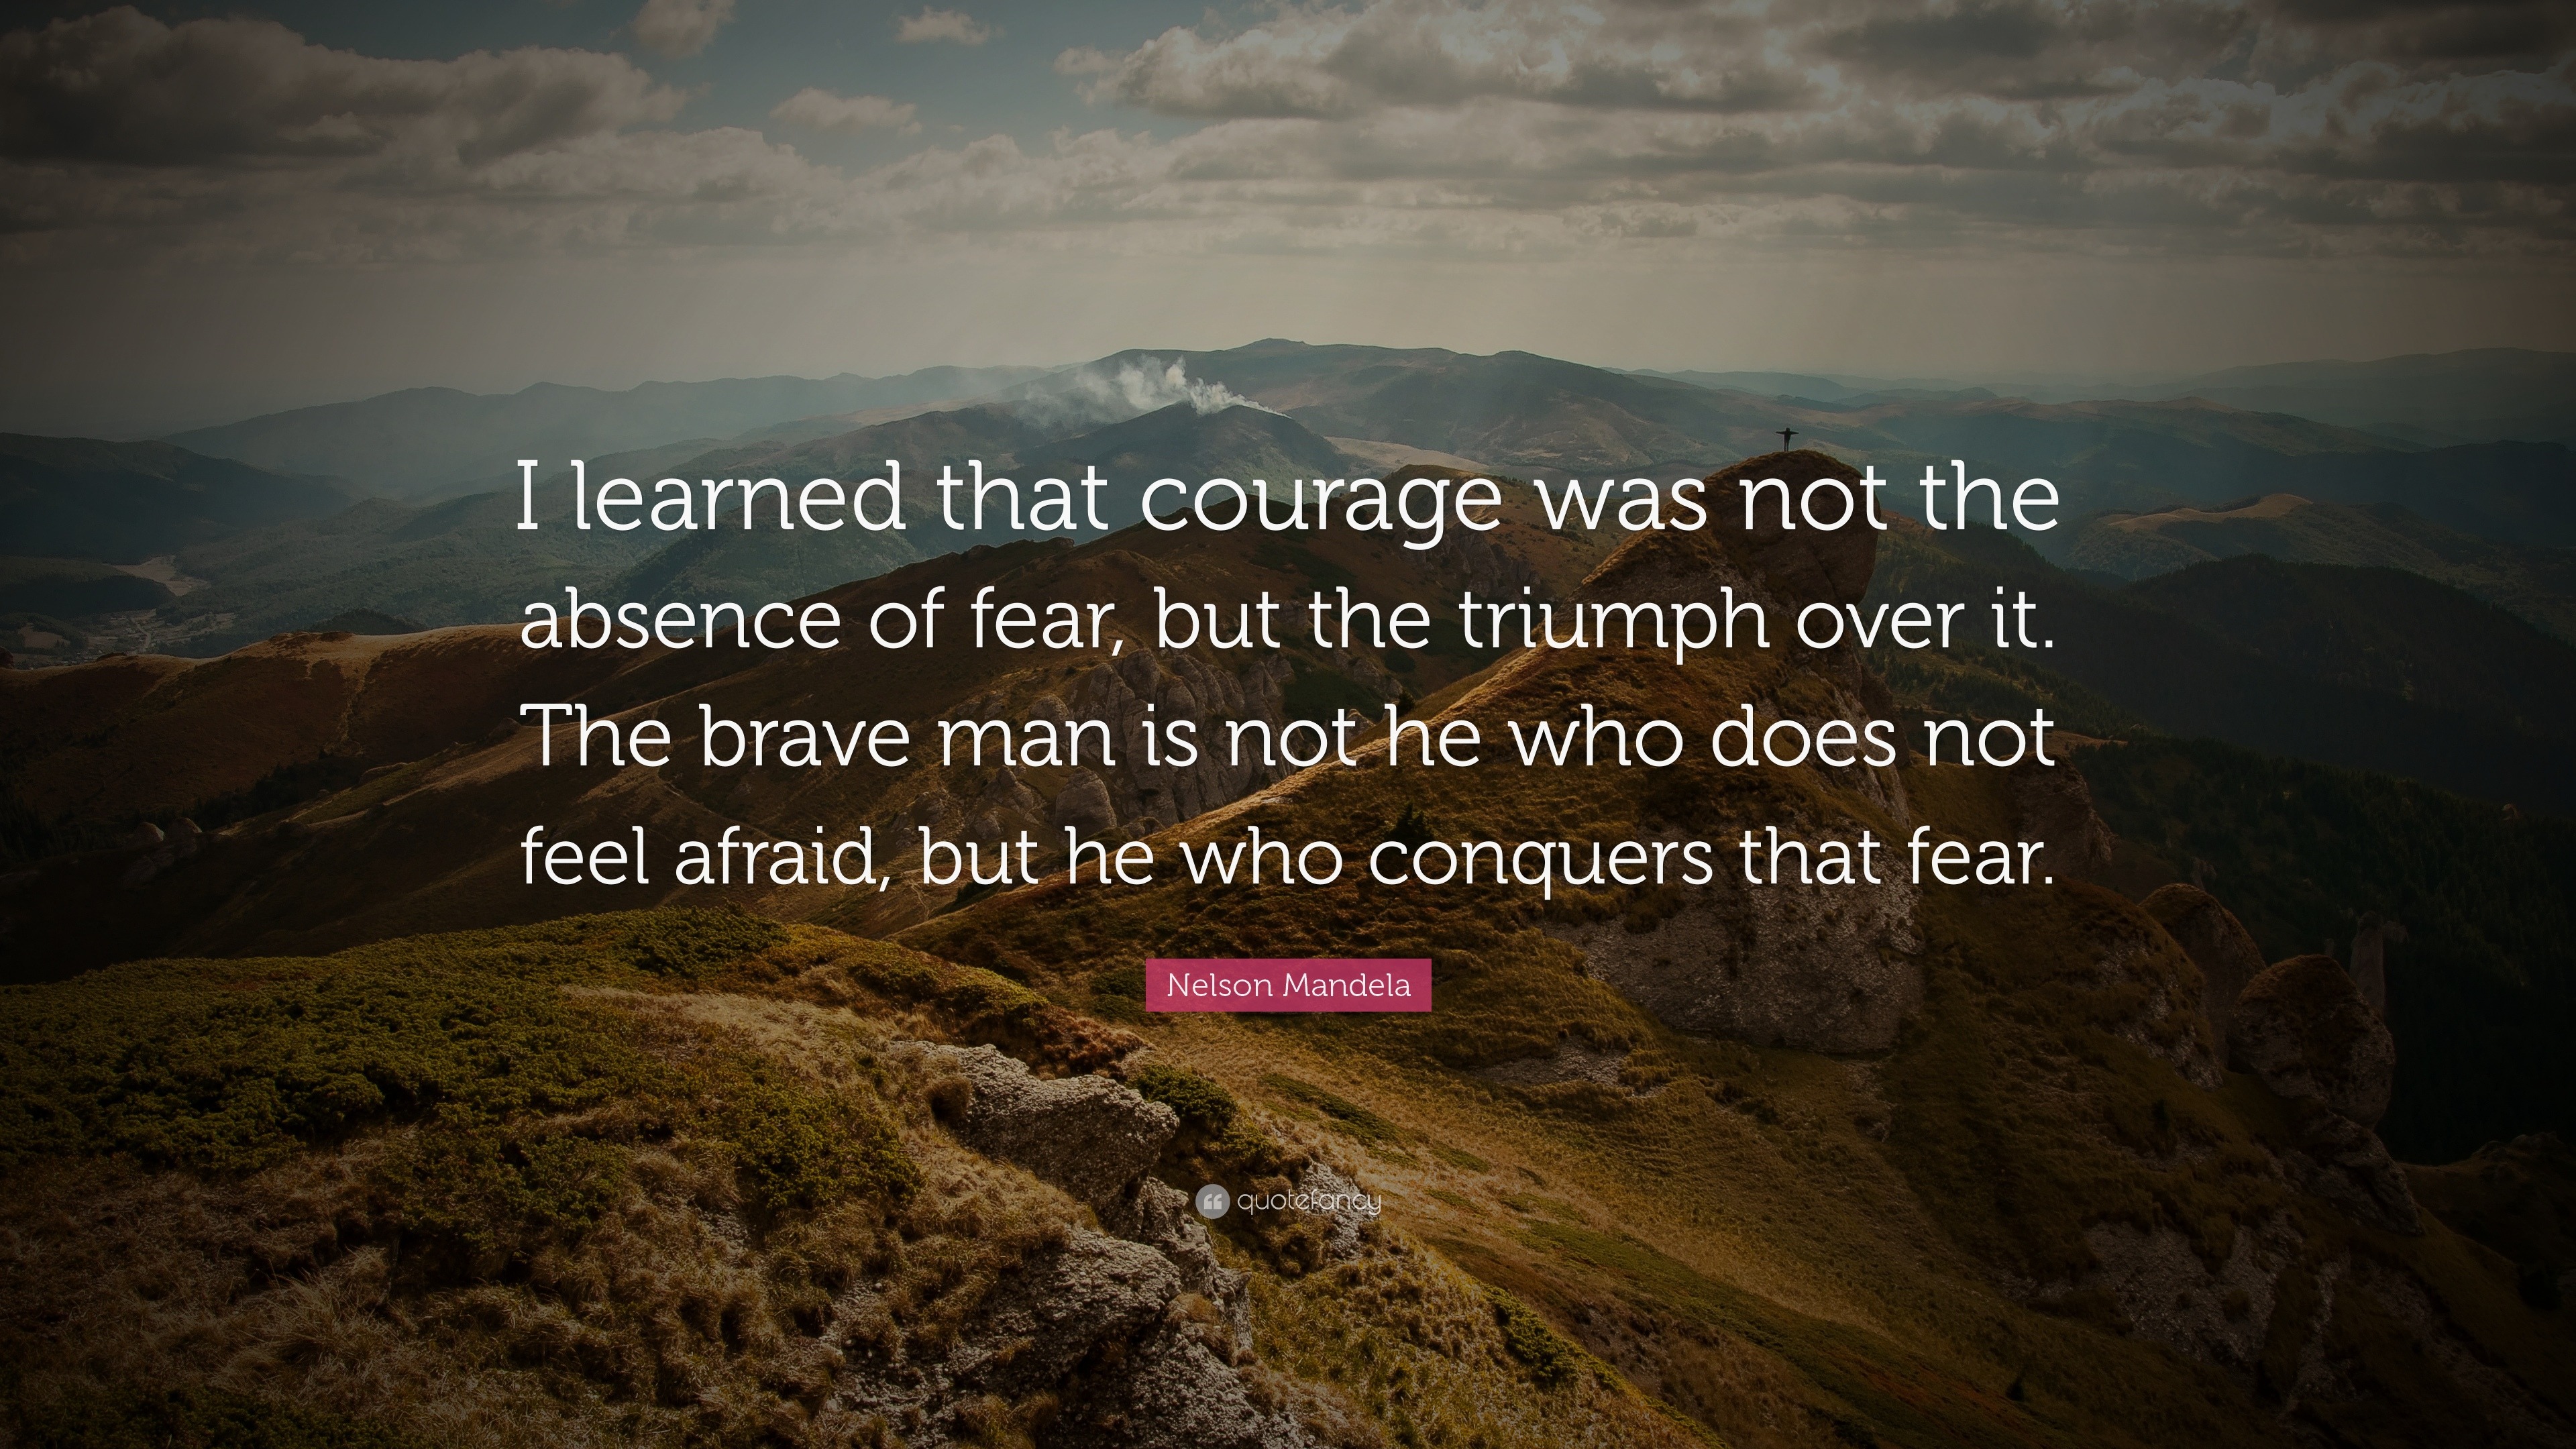 Nelson Mandela Quote: "I learned that courage was not the ...